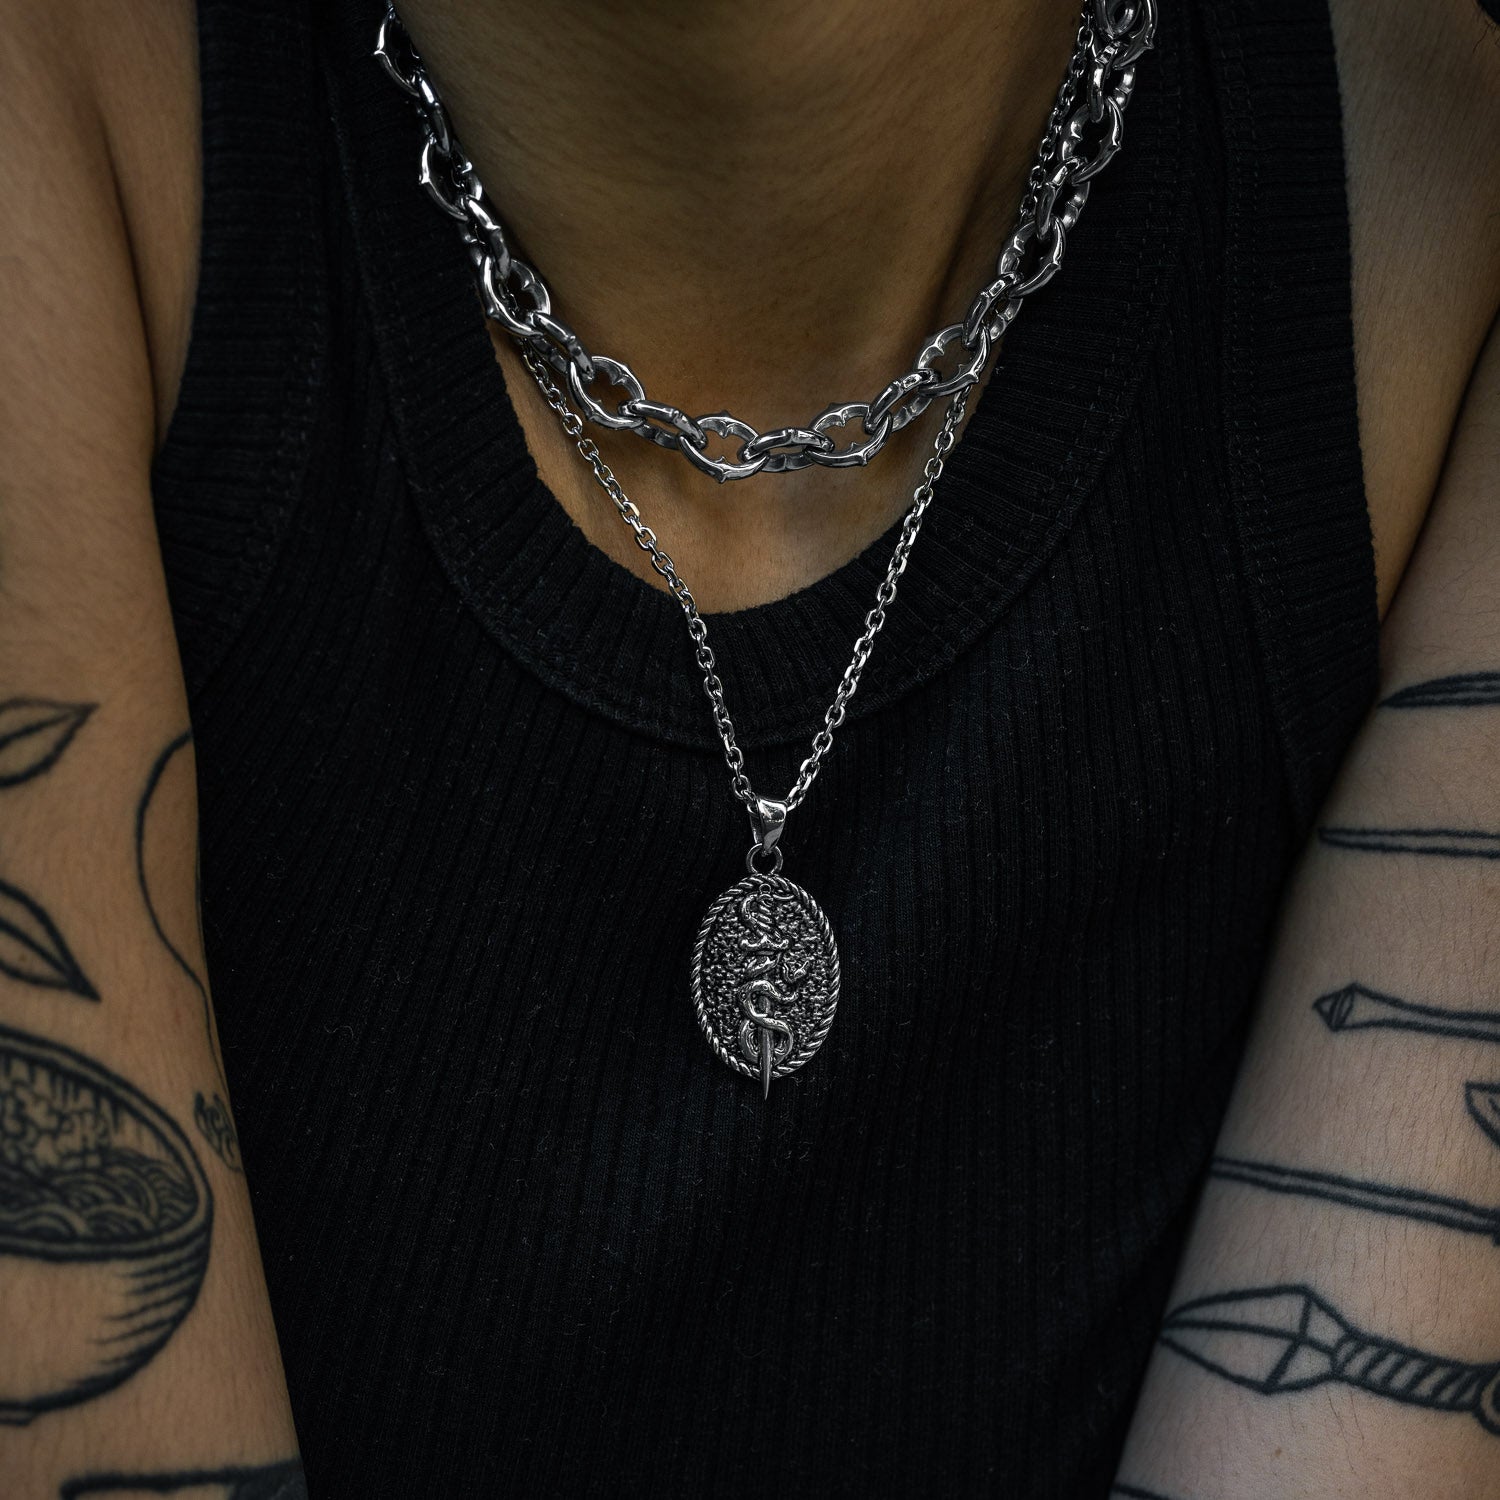 dagger with snake wrapped pendant necklace by statement collective